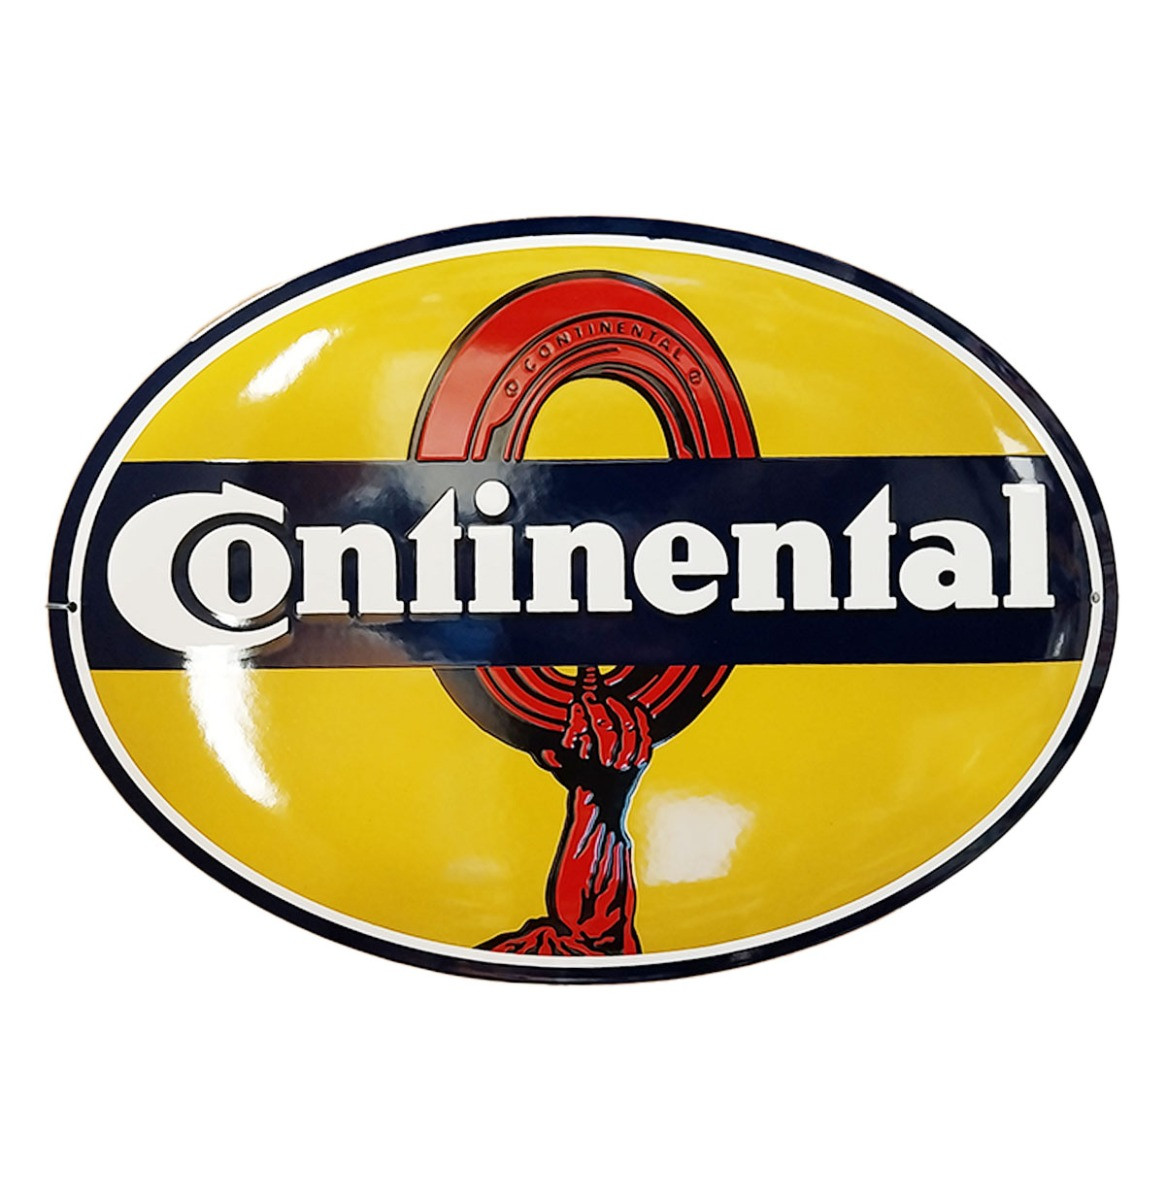 Continental Tires Emaille Bord - 55 x 40 cm